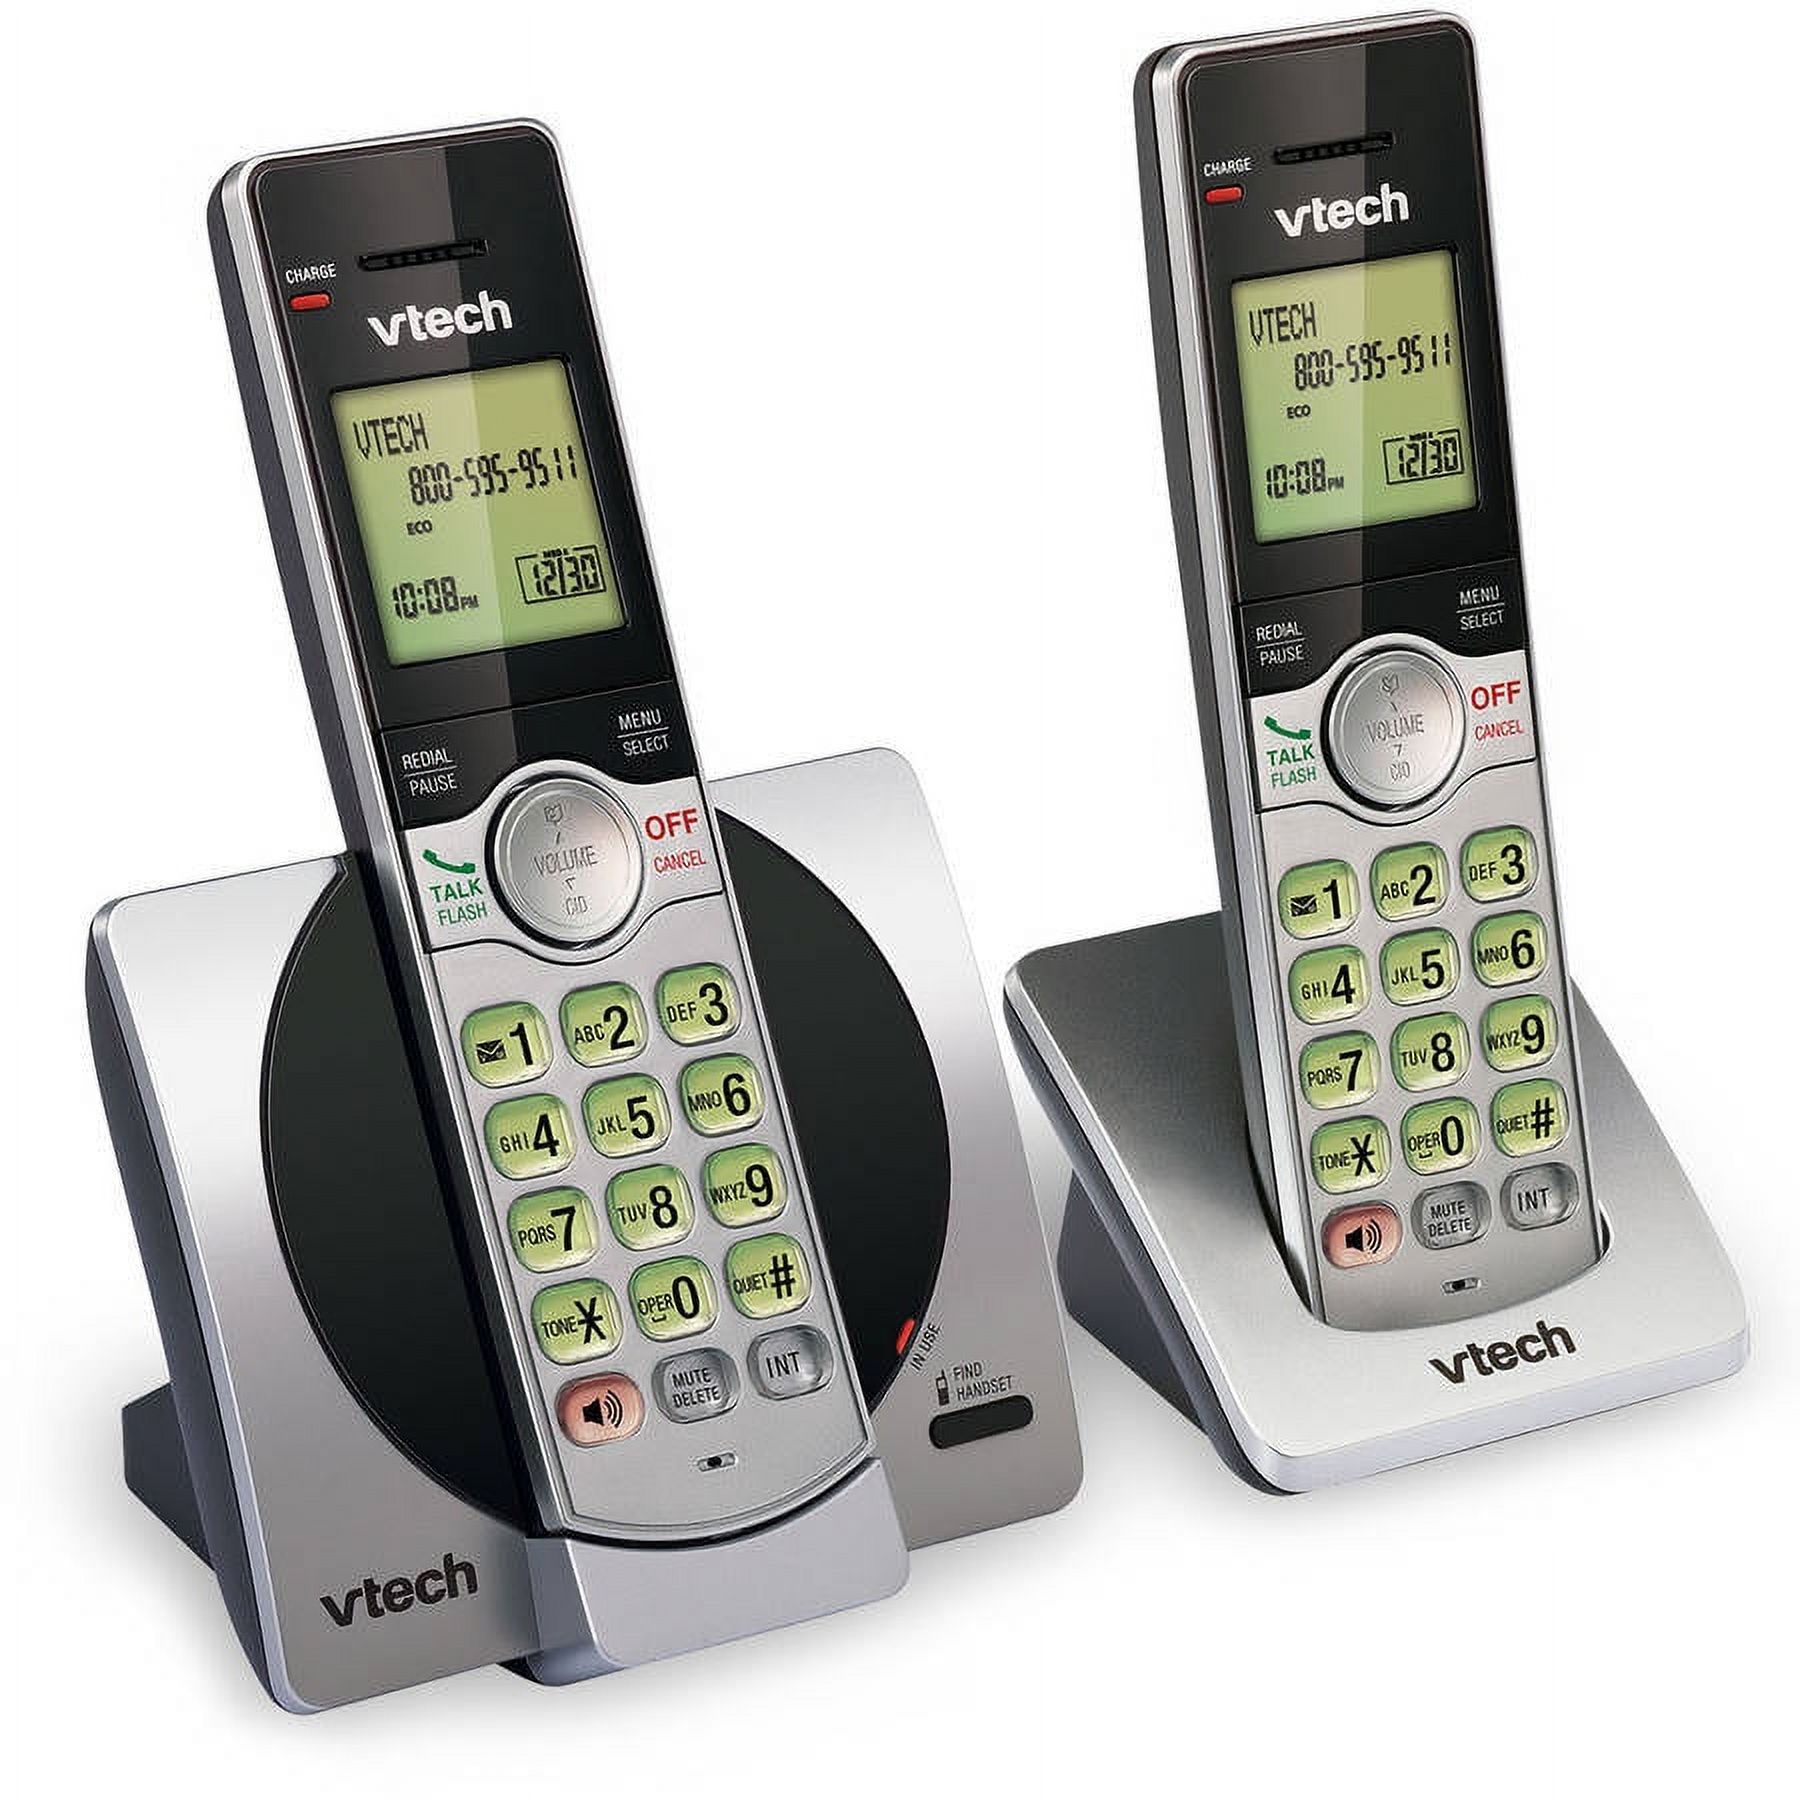 VTech CS6919-2 DECT 6.0 Cordless Phone with Caller ID and Handset Speakerphone, 2 Handsets, Silver/Black - image 2 of 4